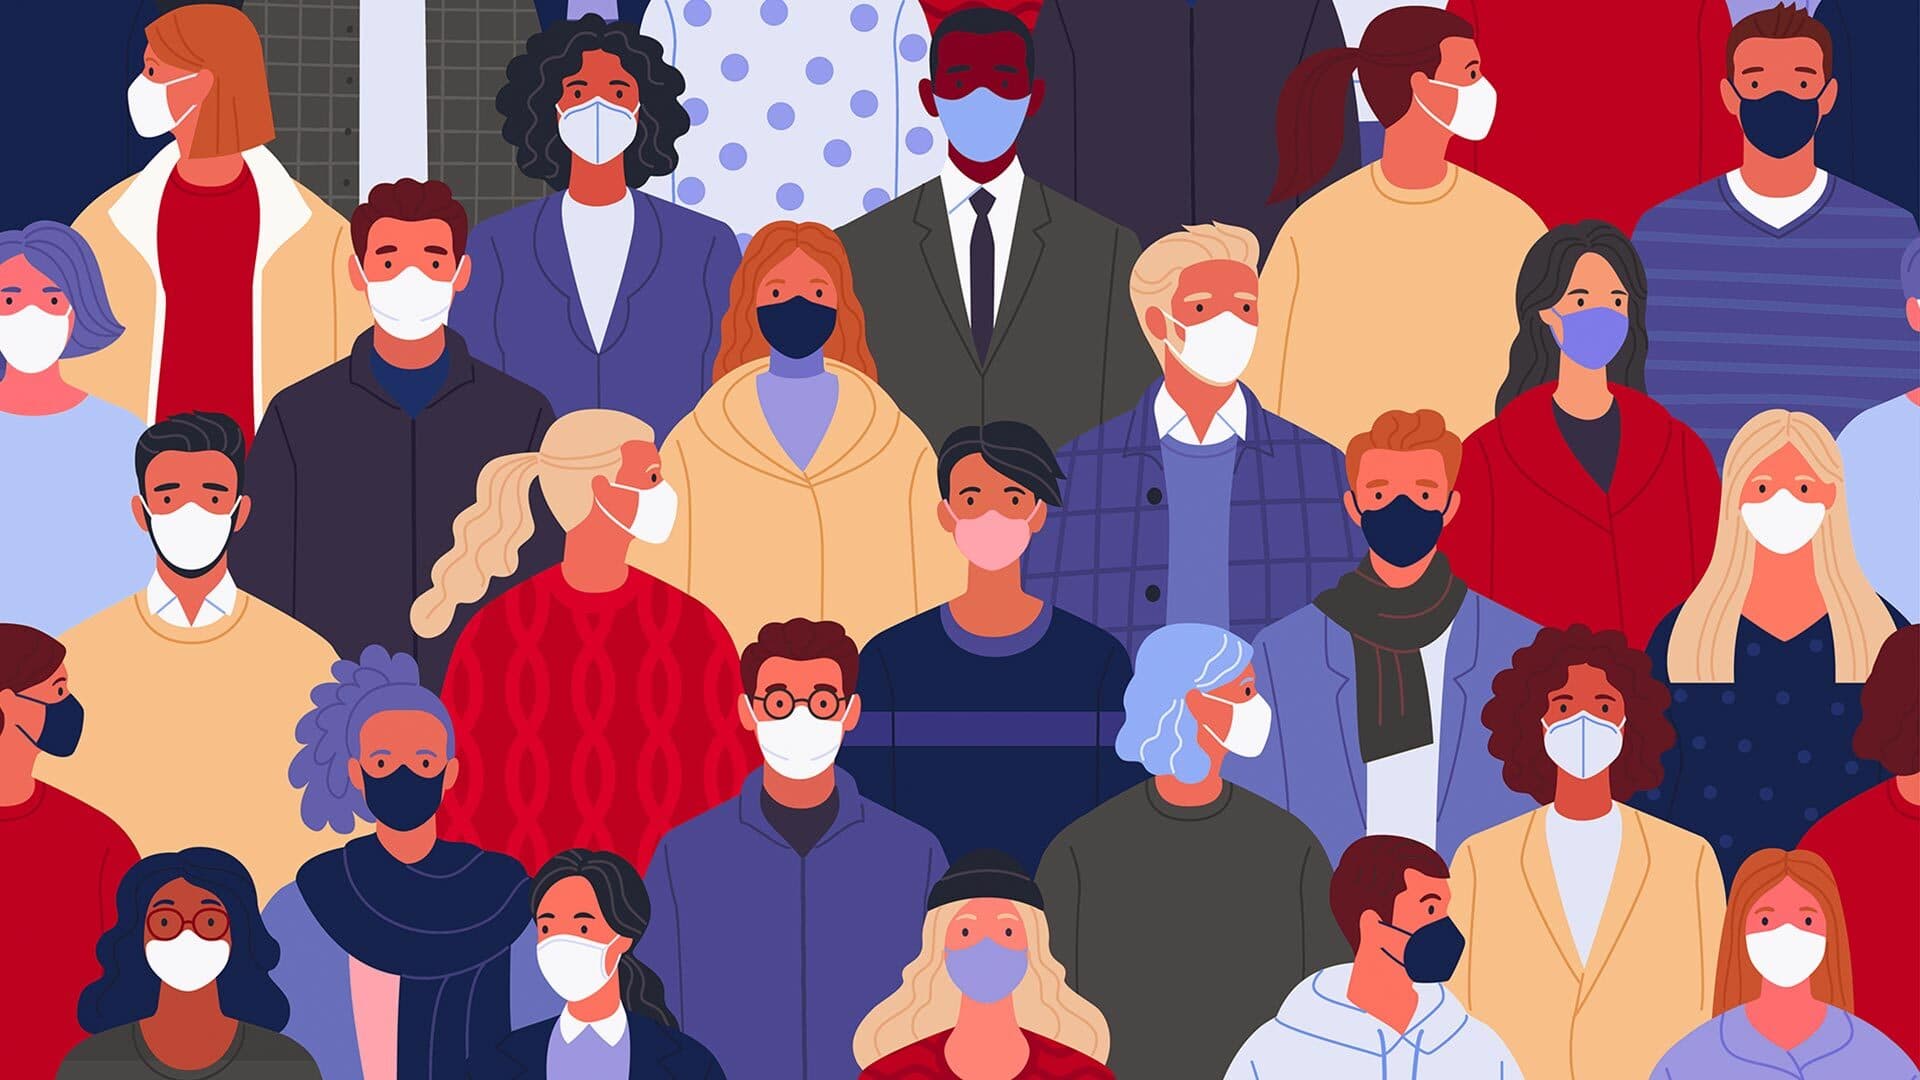 Illustration of crowd of people wearing masks